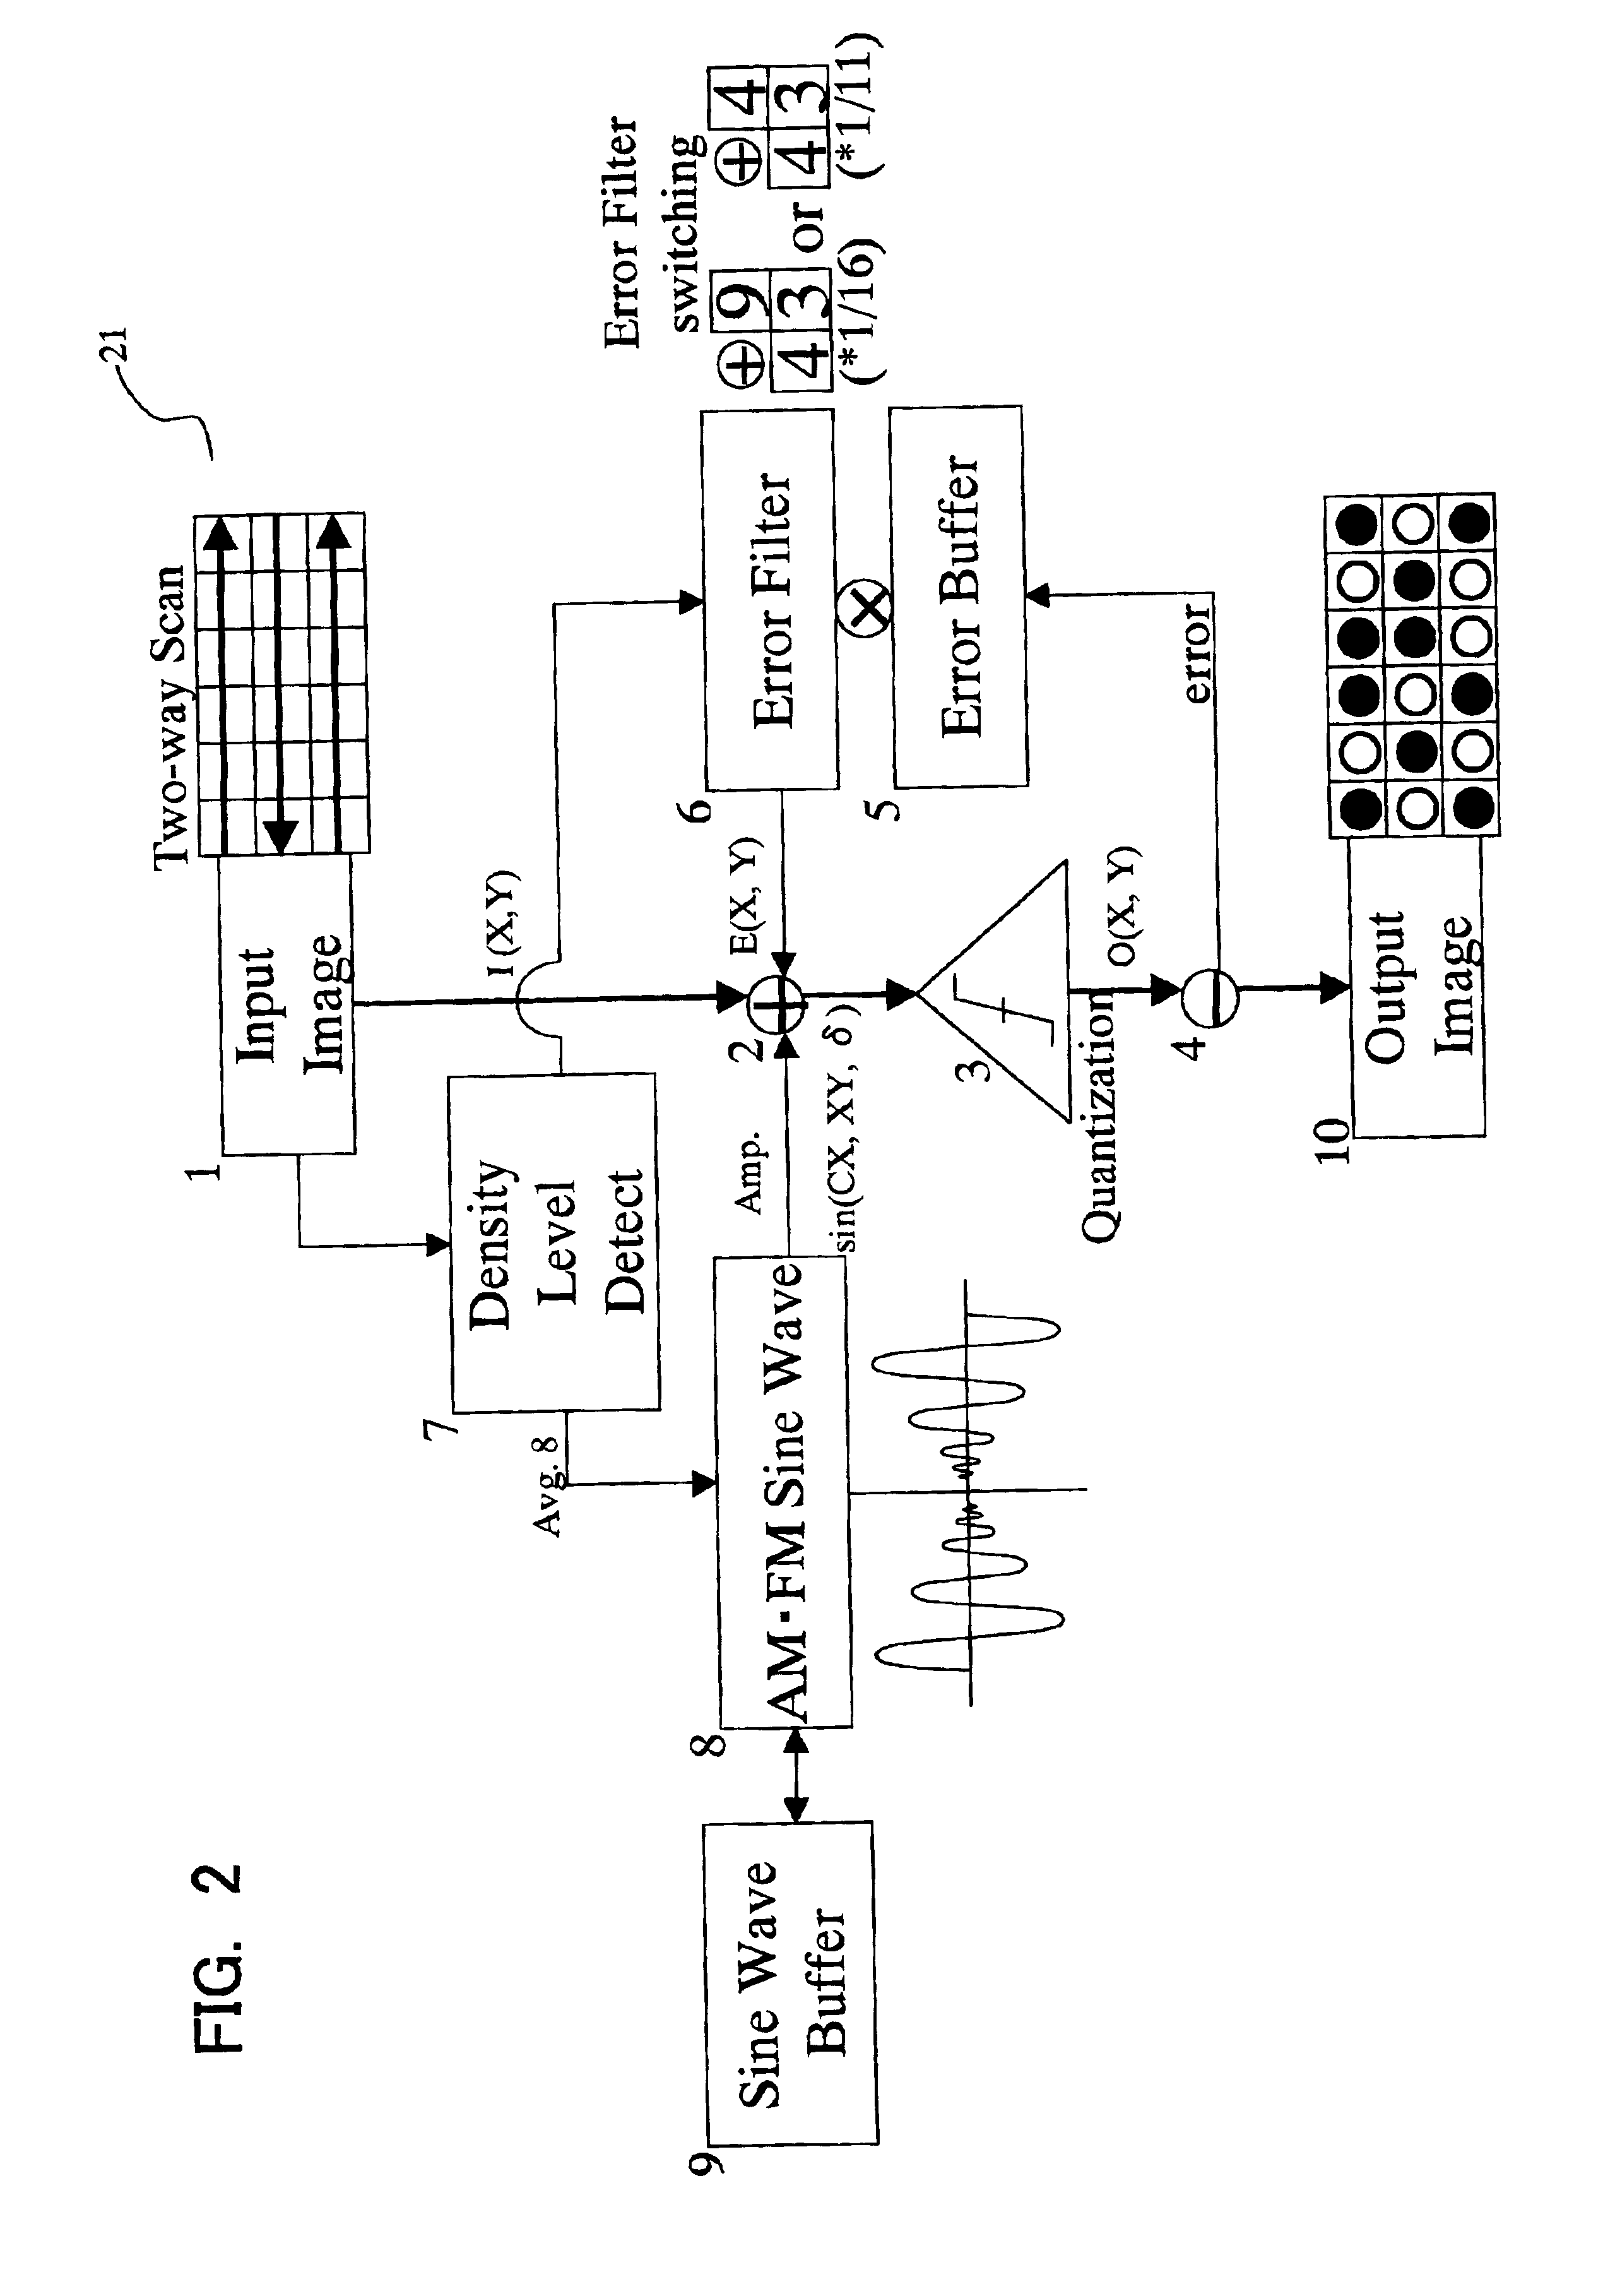 Method, processor and program for error diffusion modified with AM-FM sine wave